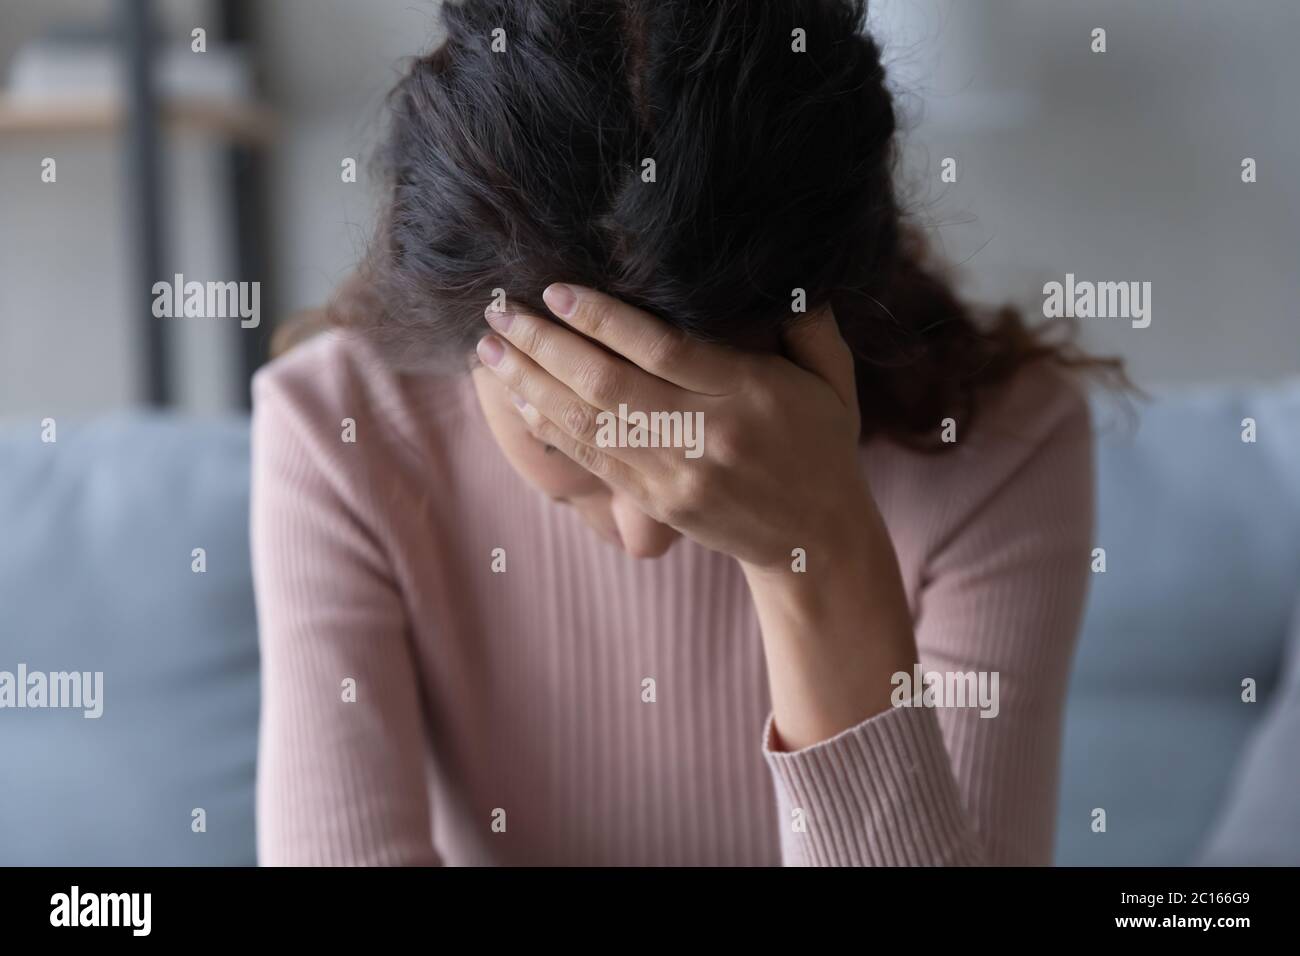 Close up unhappy depressed young woman touching forehead Stock Photo